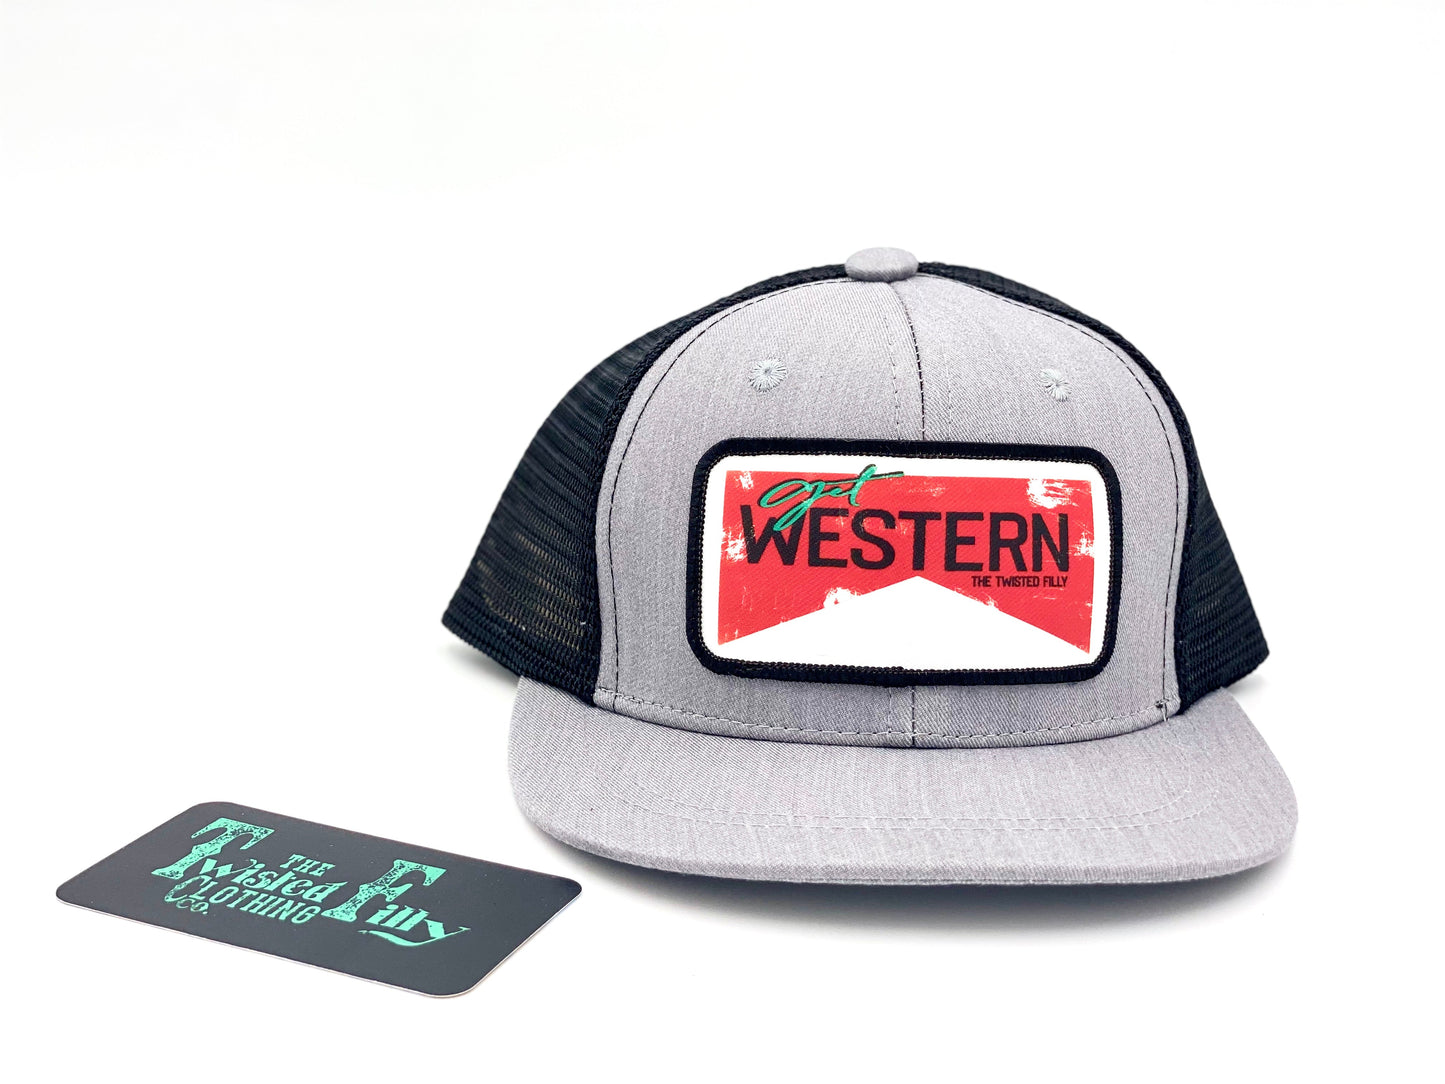 Get Western - Youth/Adult Trucker Hat - Blk/Htr Gry